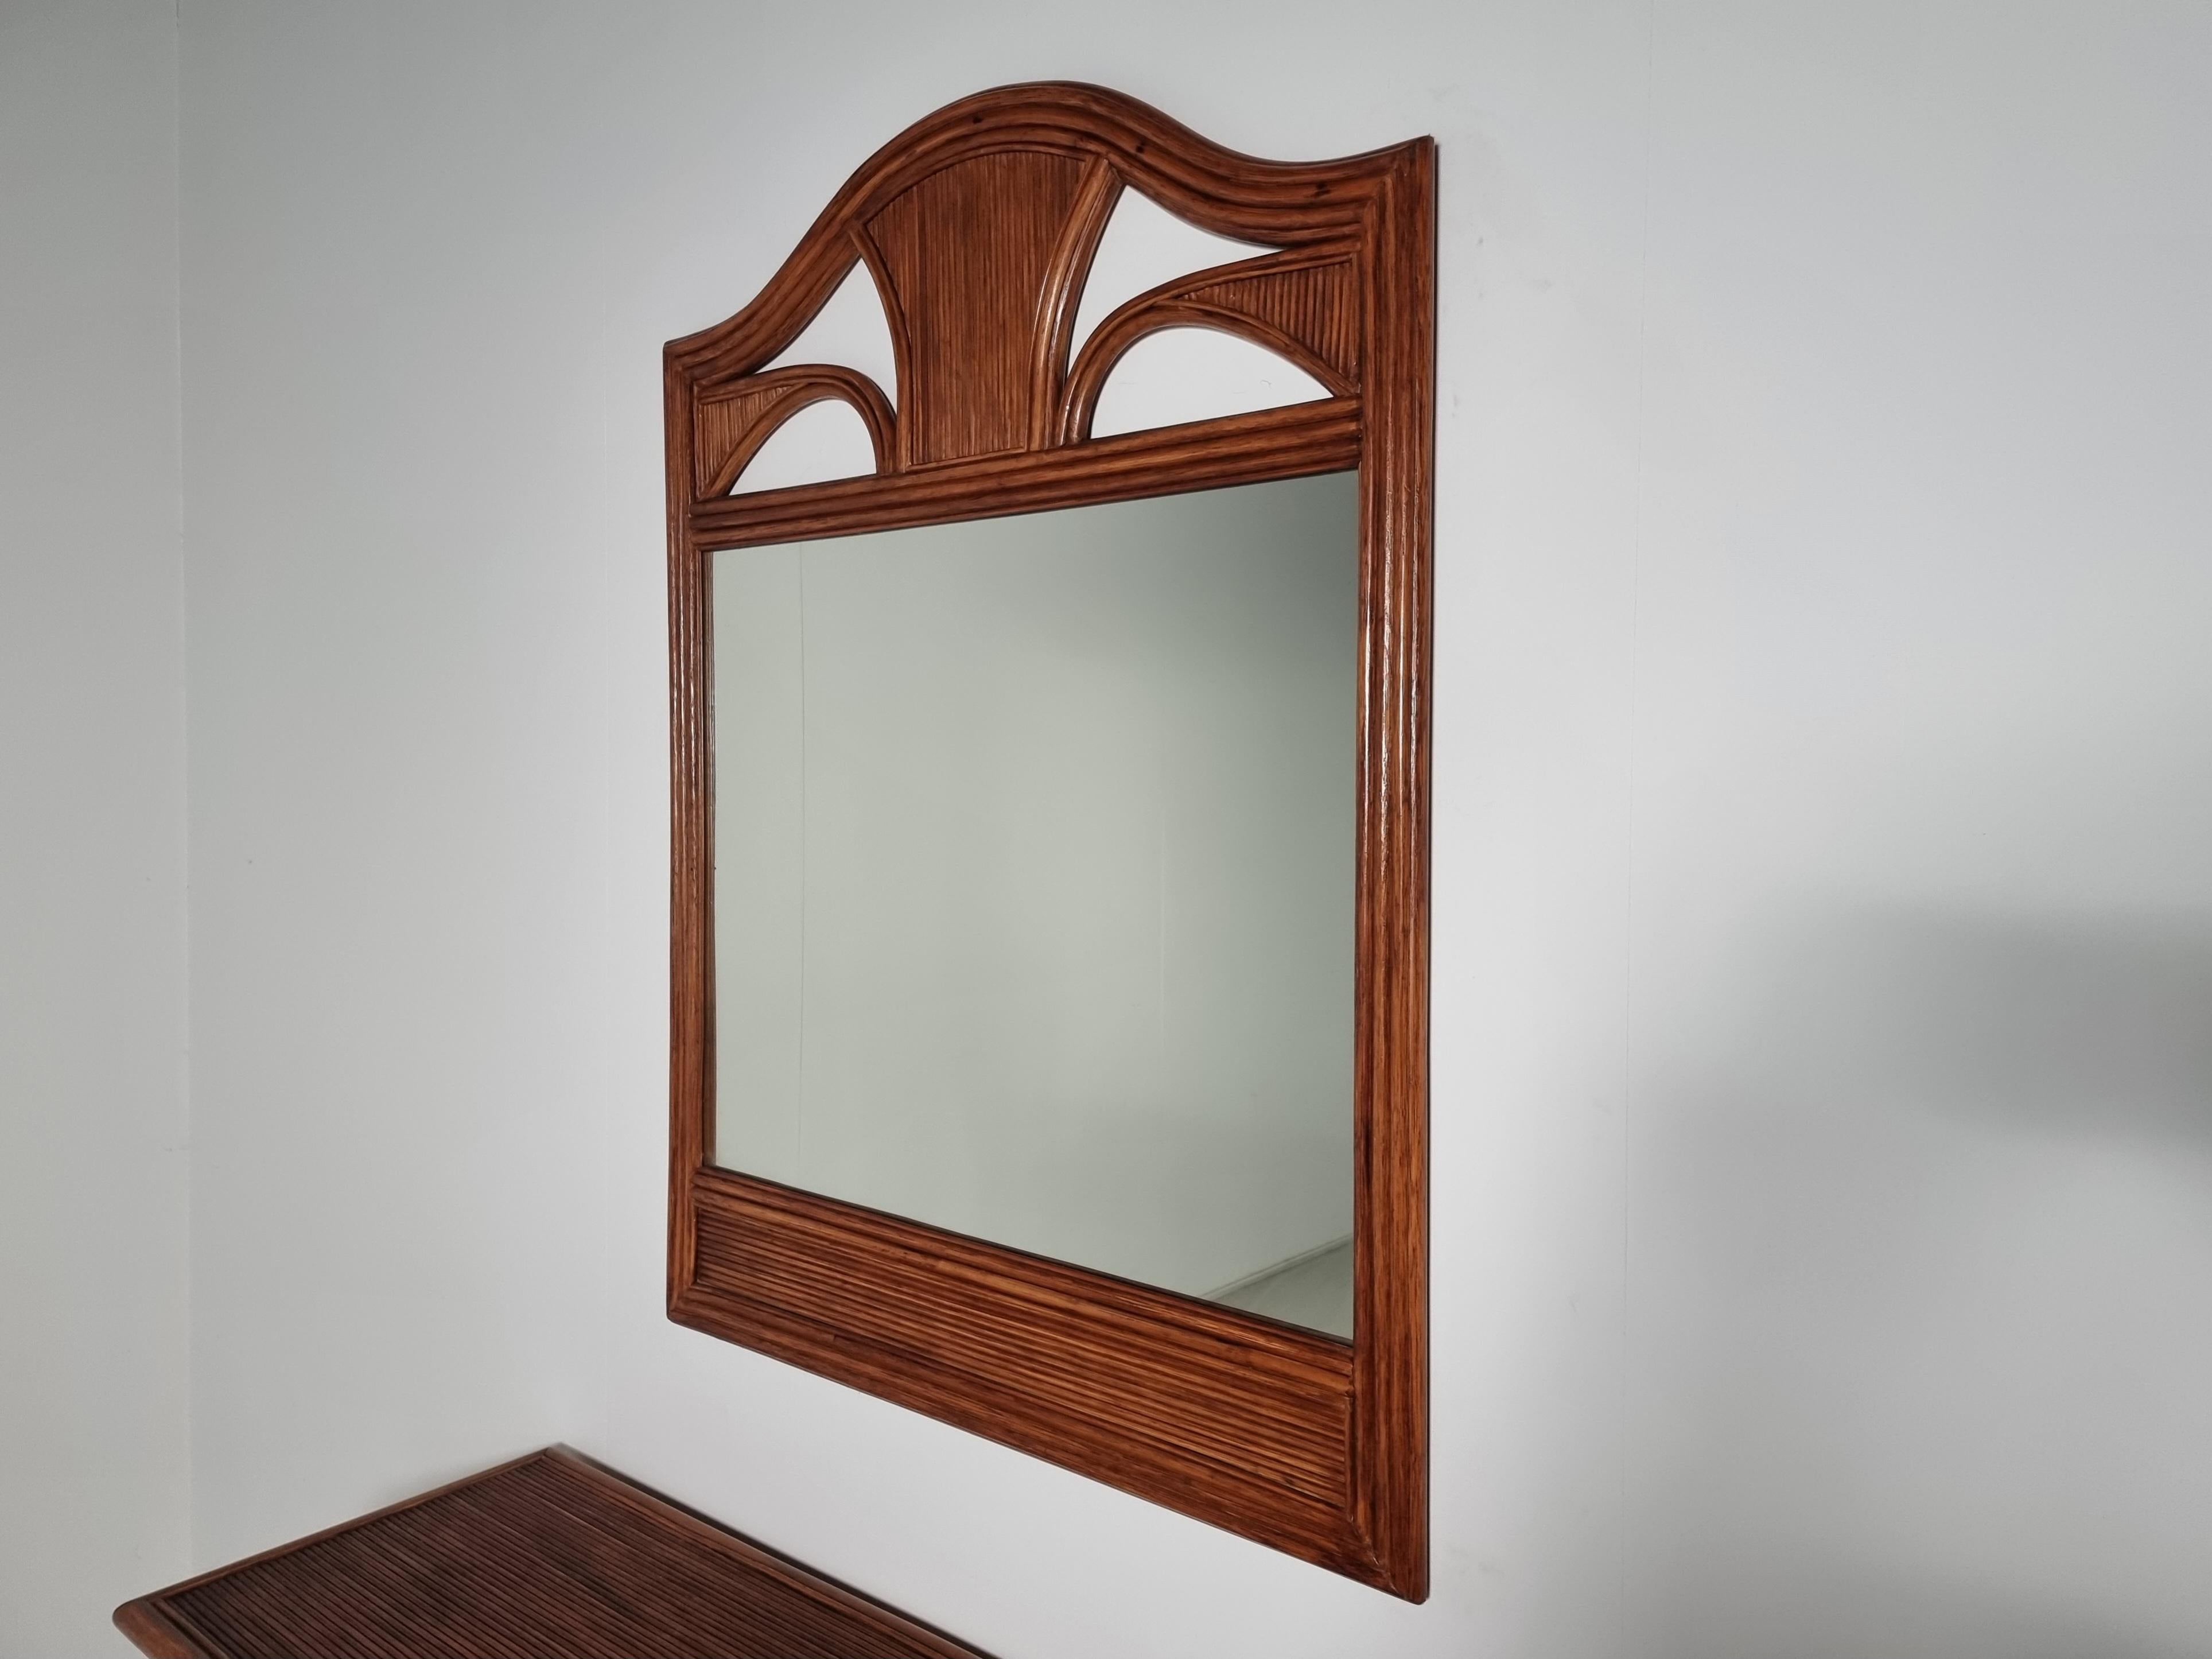 Walnut veneer Dresser with Matching Mirror from Italy, 1970s For Sale 5